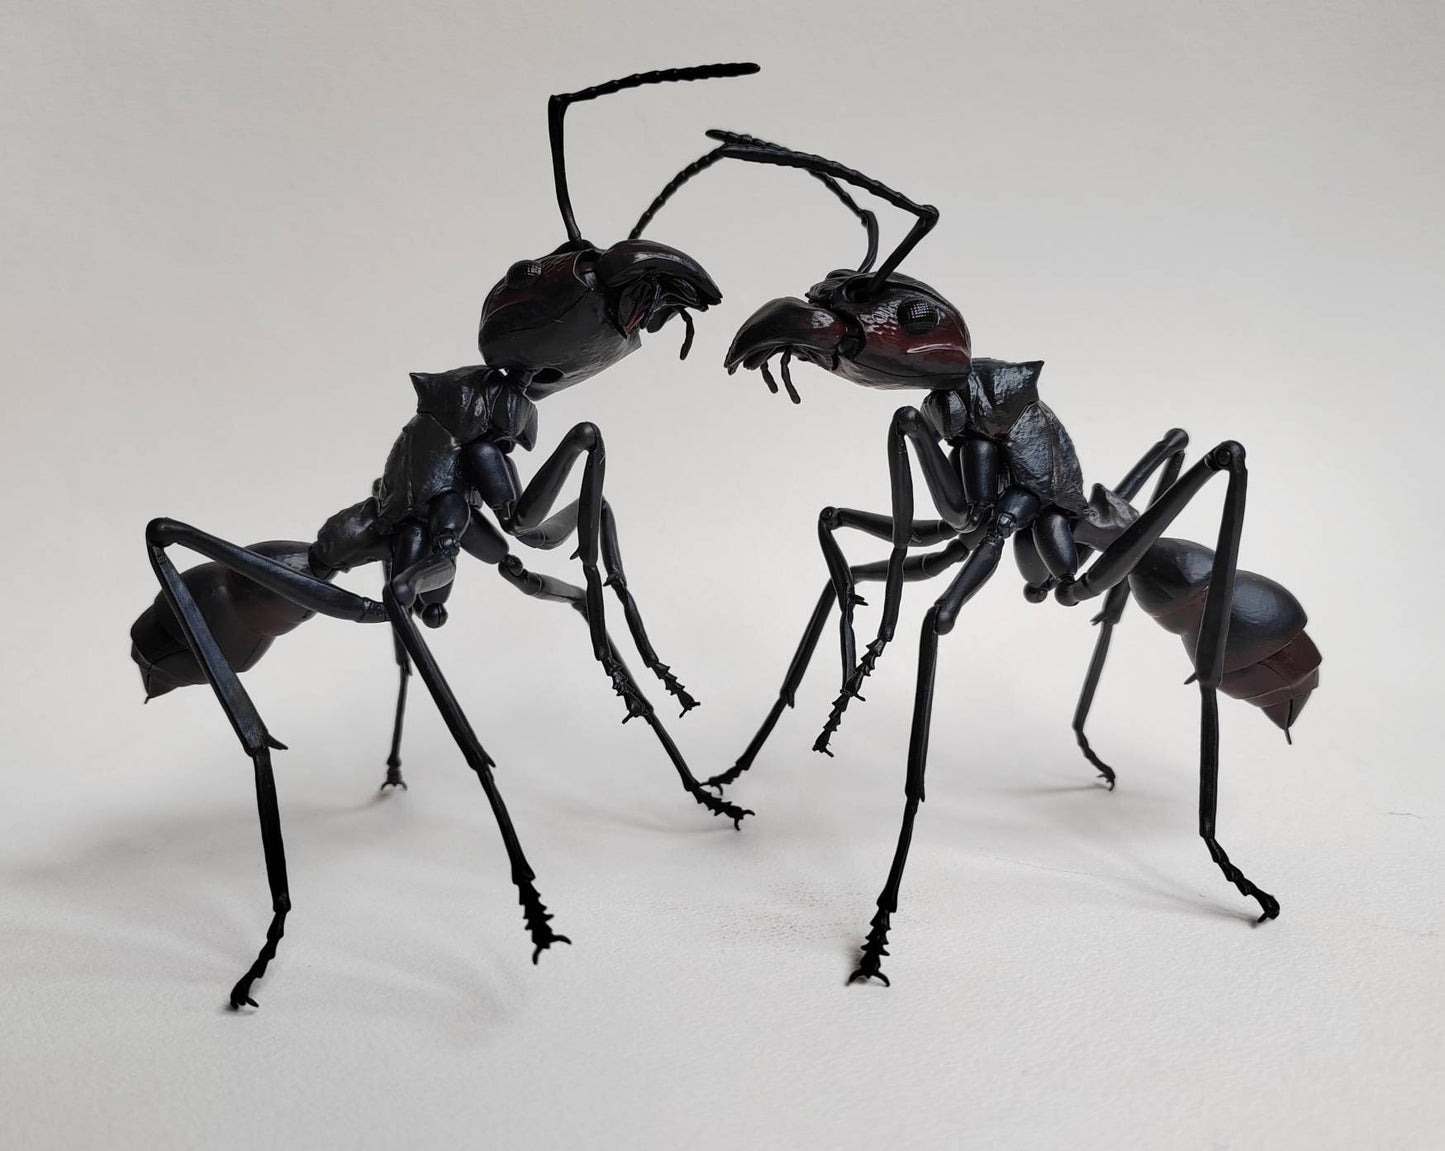 Bullet Ant, Paraponera clavata, Japanese fully posable figure (And other ants!) made by Bandai